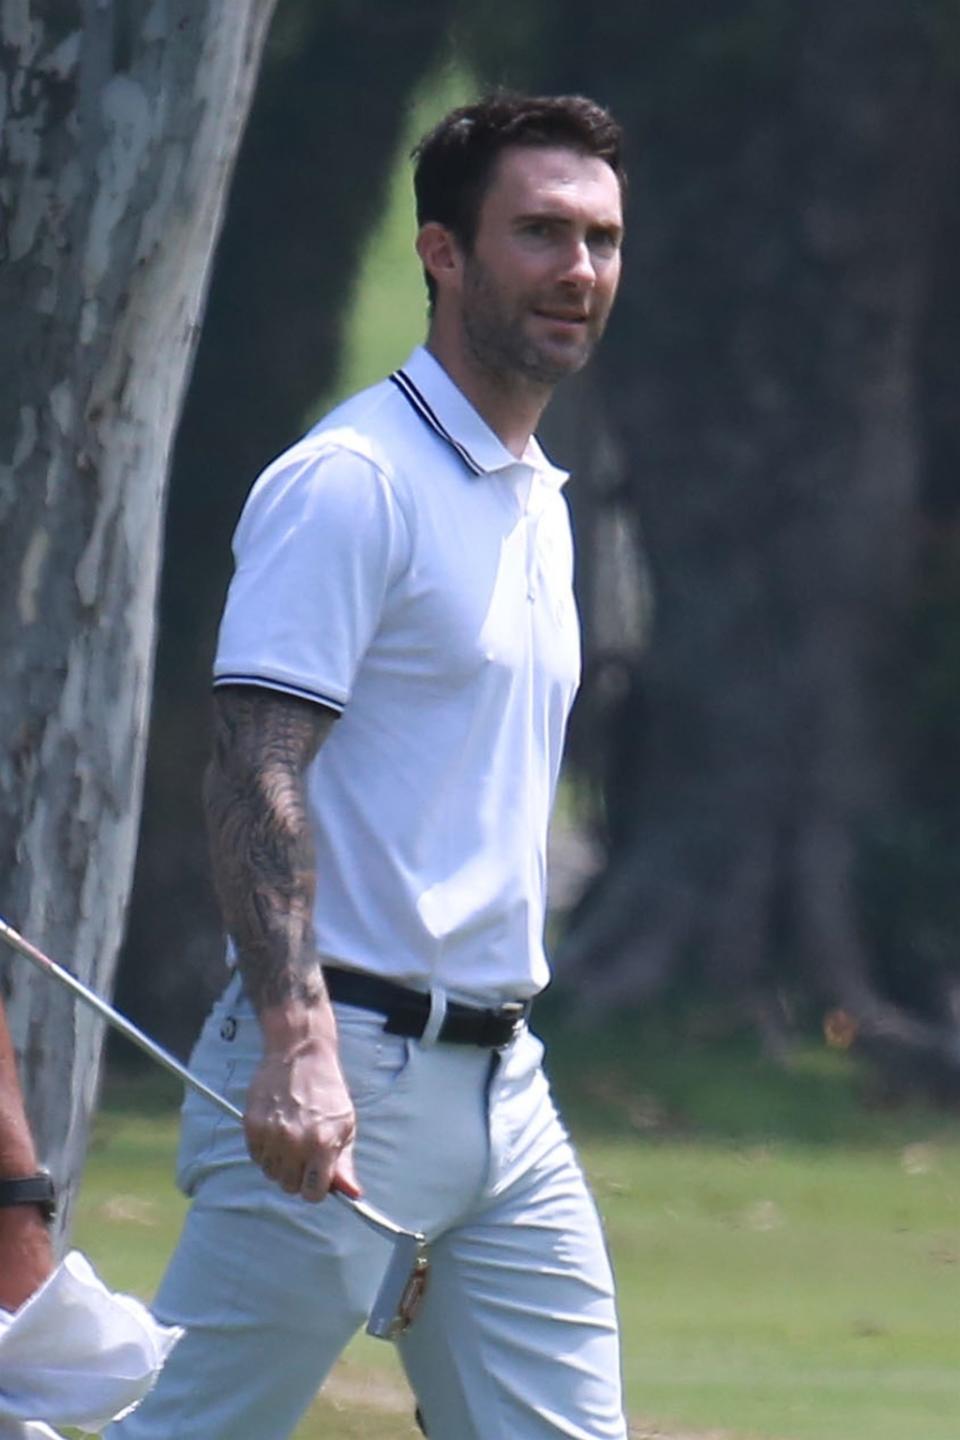 <p>Rockers need a day off, too. So the Maroon 5 singer hit the links with some pals in Rio di Janeiro, where he and his band played the Rock in Rio music festival. (Photo: Backgrid) </p>